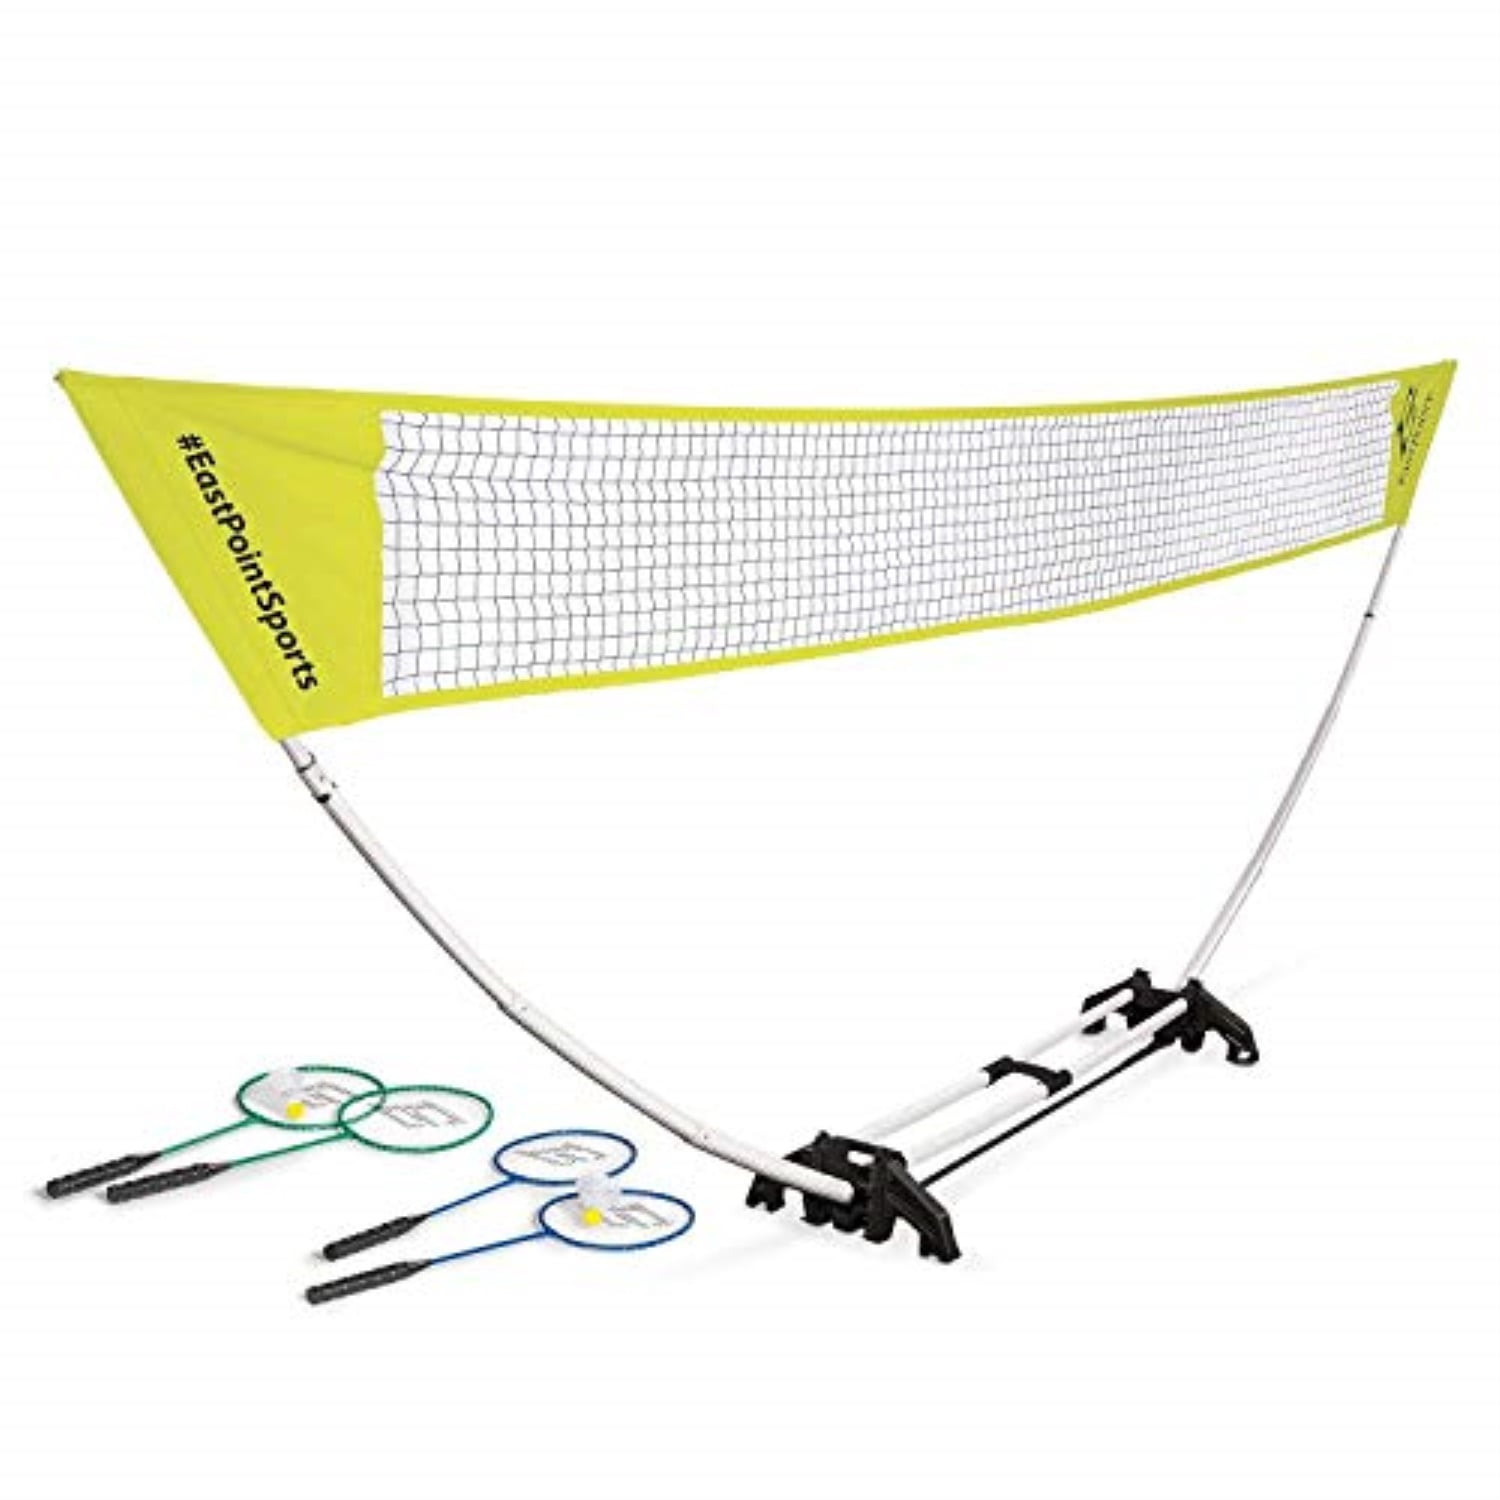 EastPoint Sports Easy Setup Badminton Net Set -5 Feet- Features Carry Storage Built-in Base, Weather Proof Material